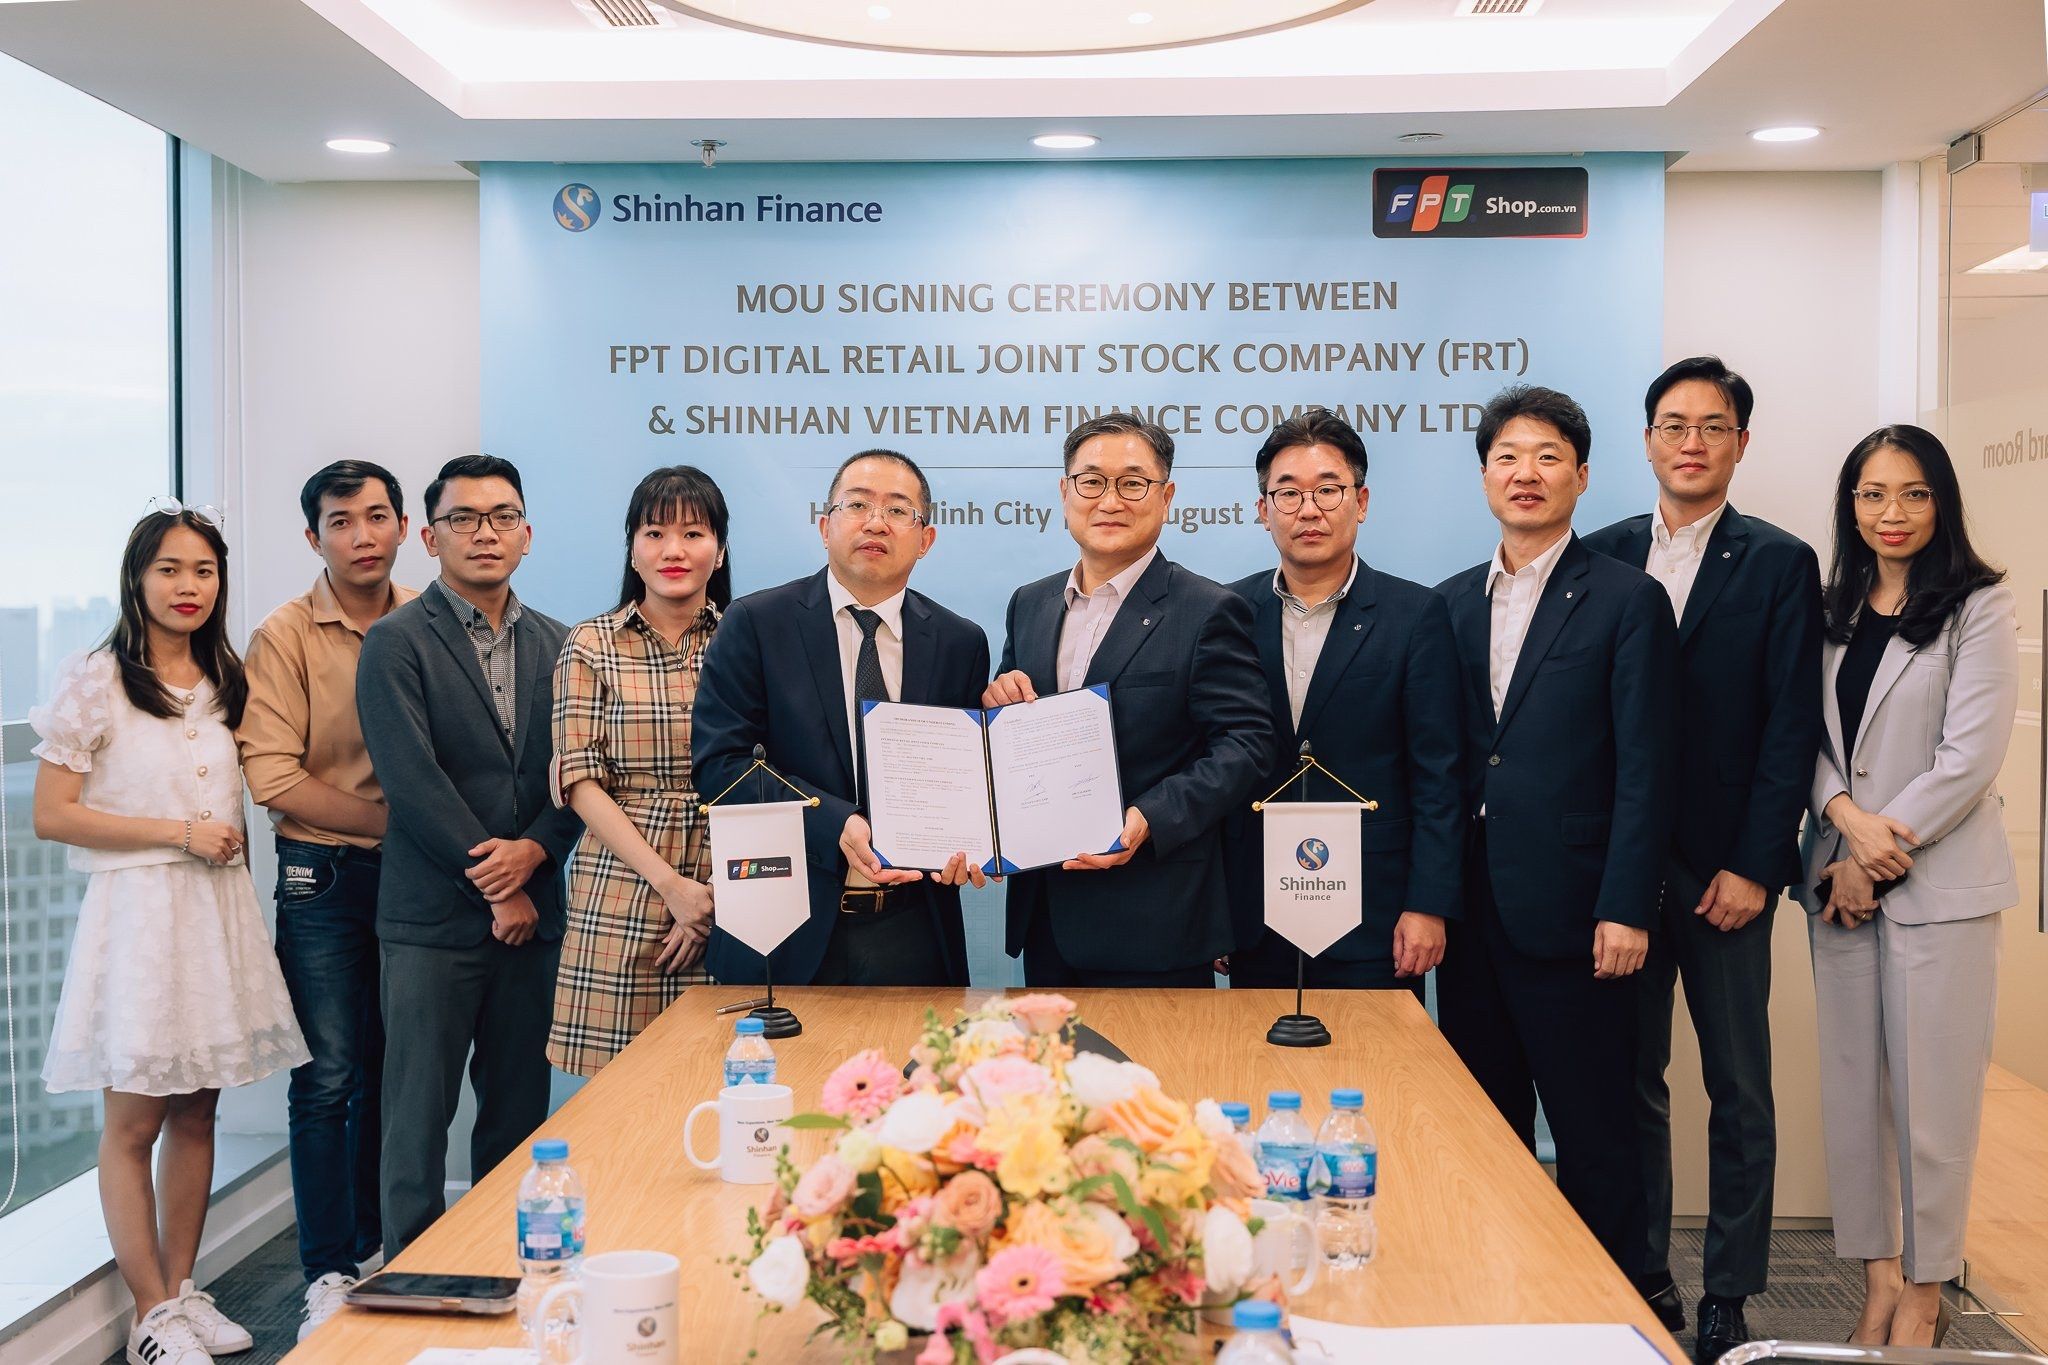 MOU Signing Ceremony between Shinhan Finance & FPT Retail